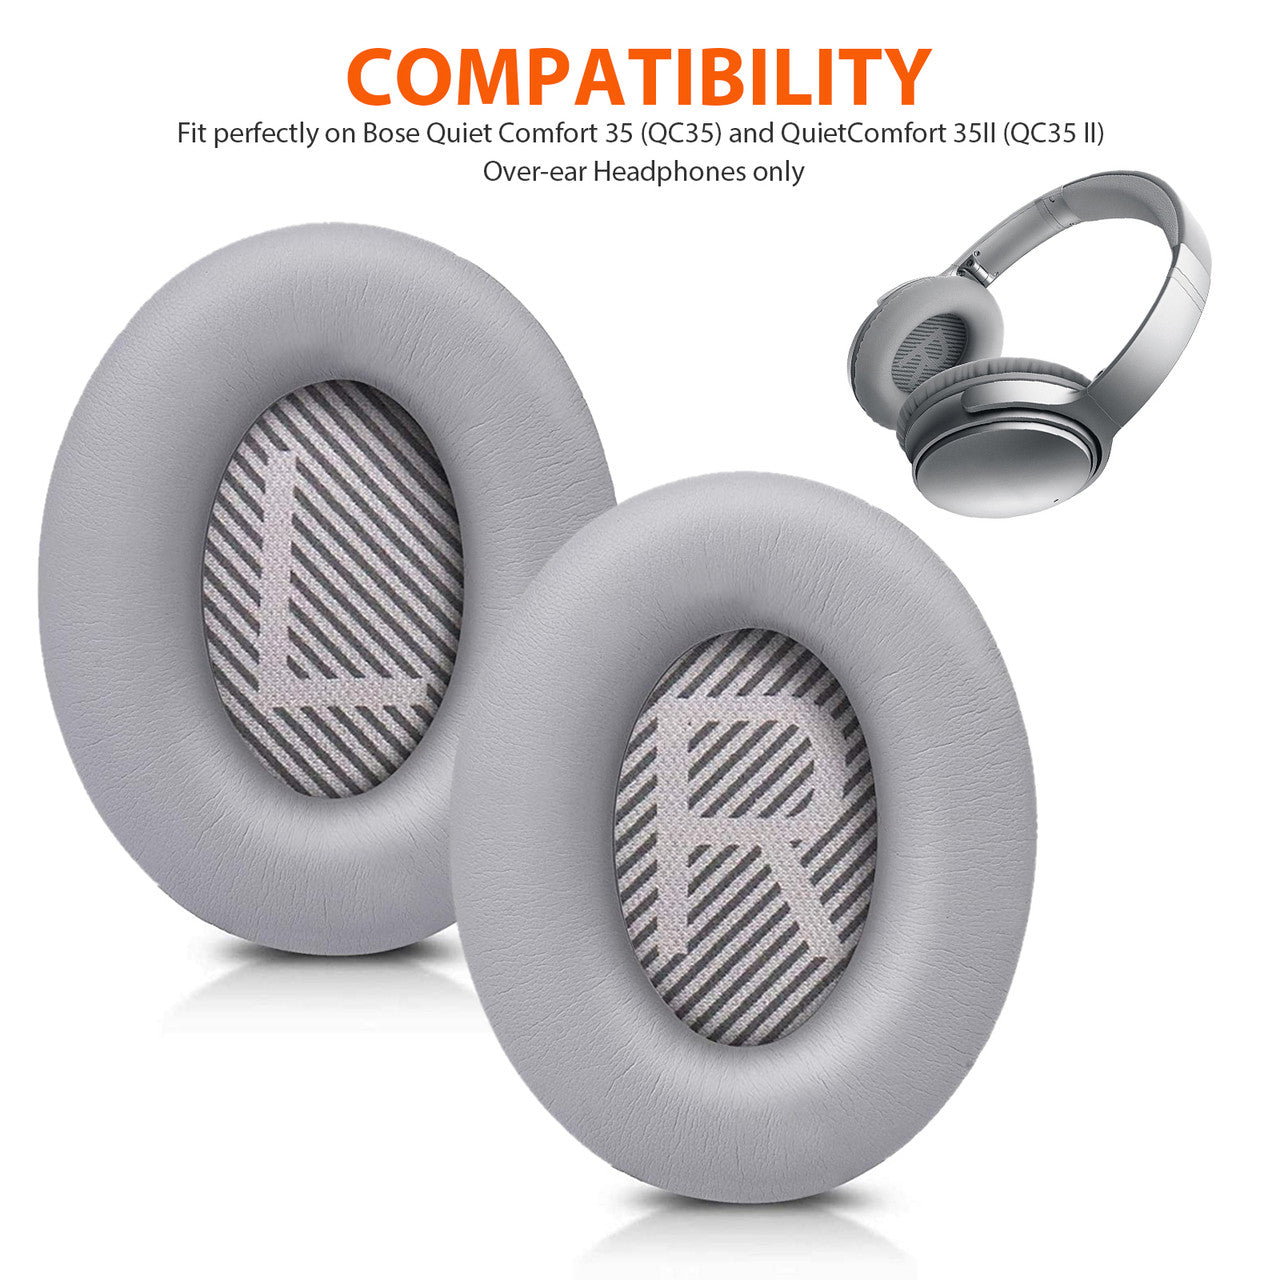 Professional Replacement Ear Pads Cushions, Earpads Compatible with Boses QuietComfort 35 (Boses QC35) and Quiet Comfort 35 II (Boses QC35 II) Over-Ear Headphones